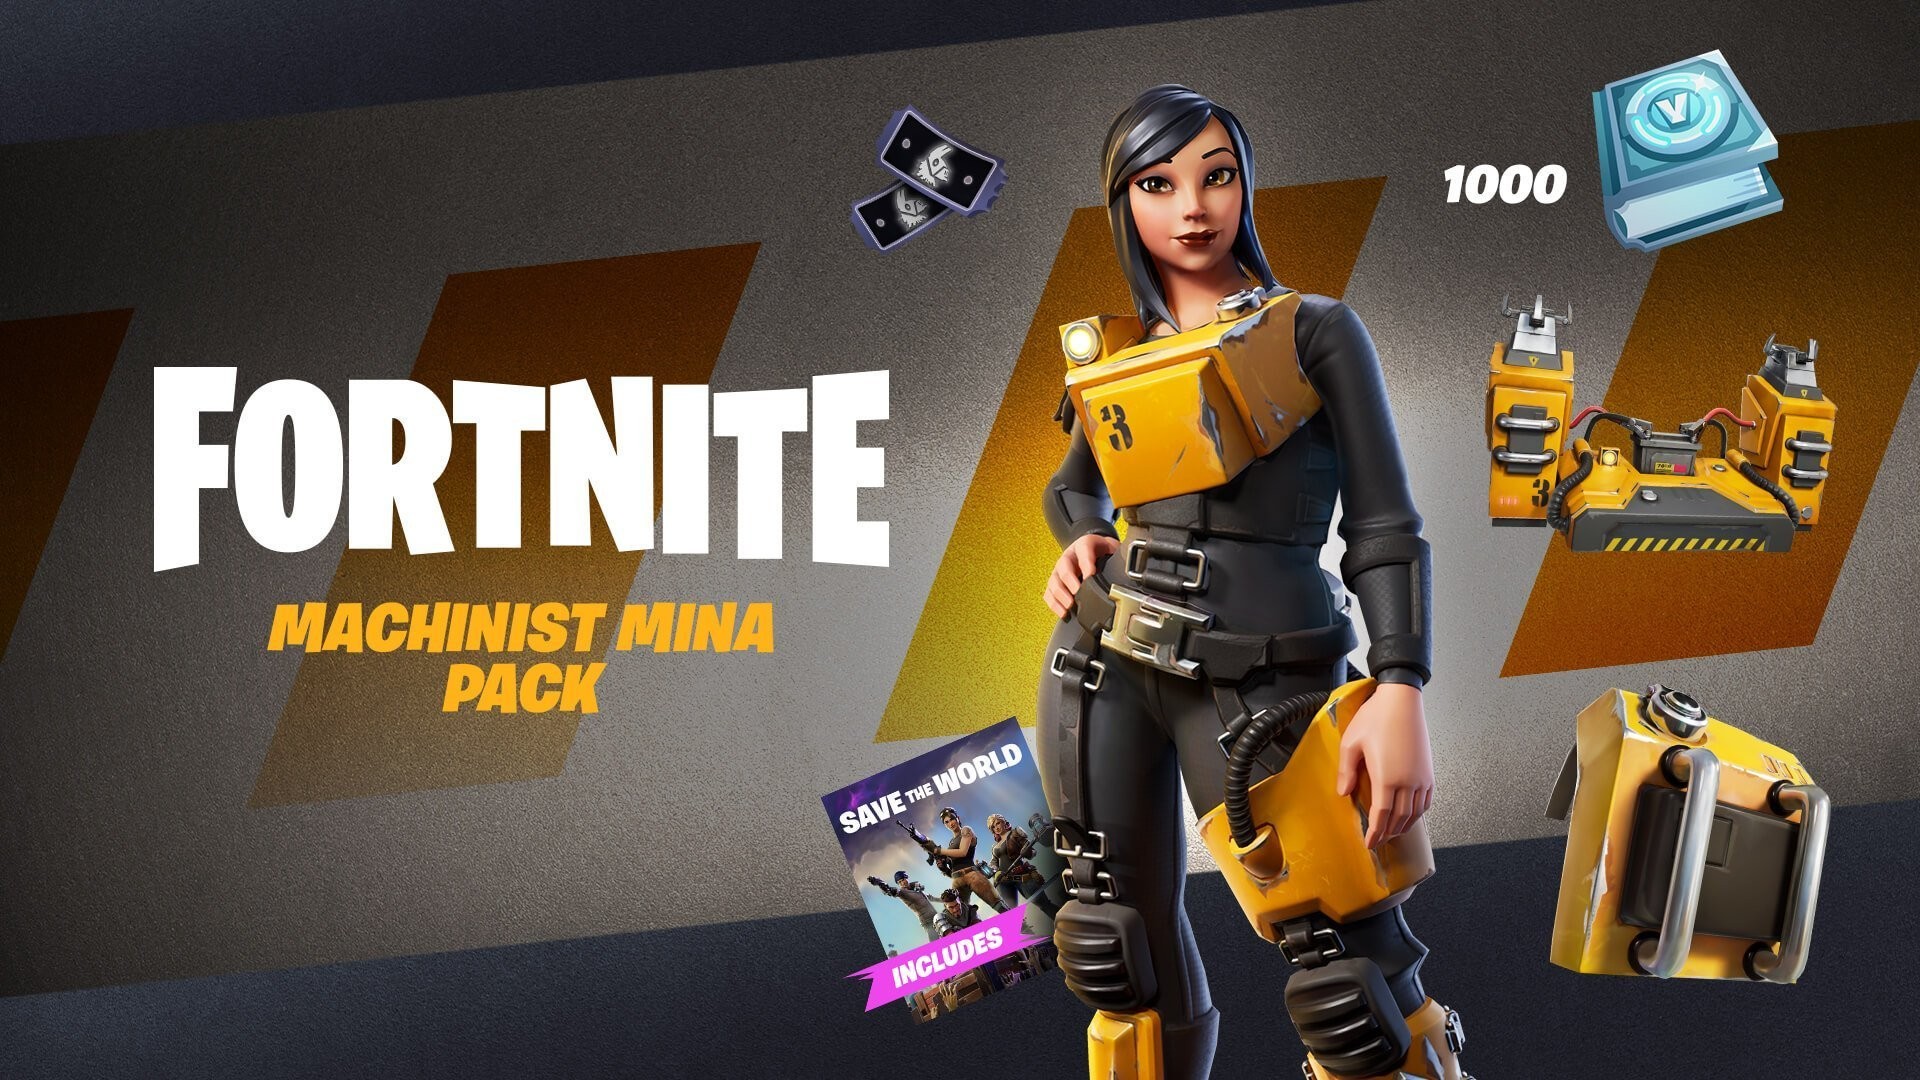 Fortnite Transformers Pack + 1000 V-Bucks Nintendo Switch DLC Code  Activation and Gameplay 